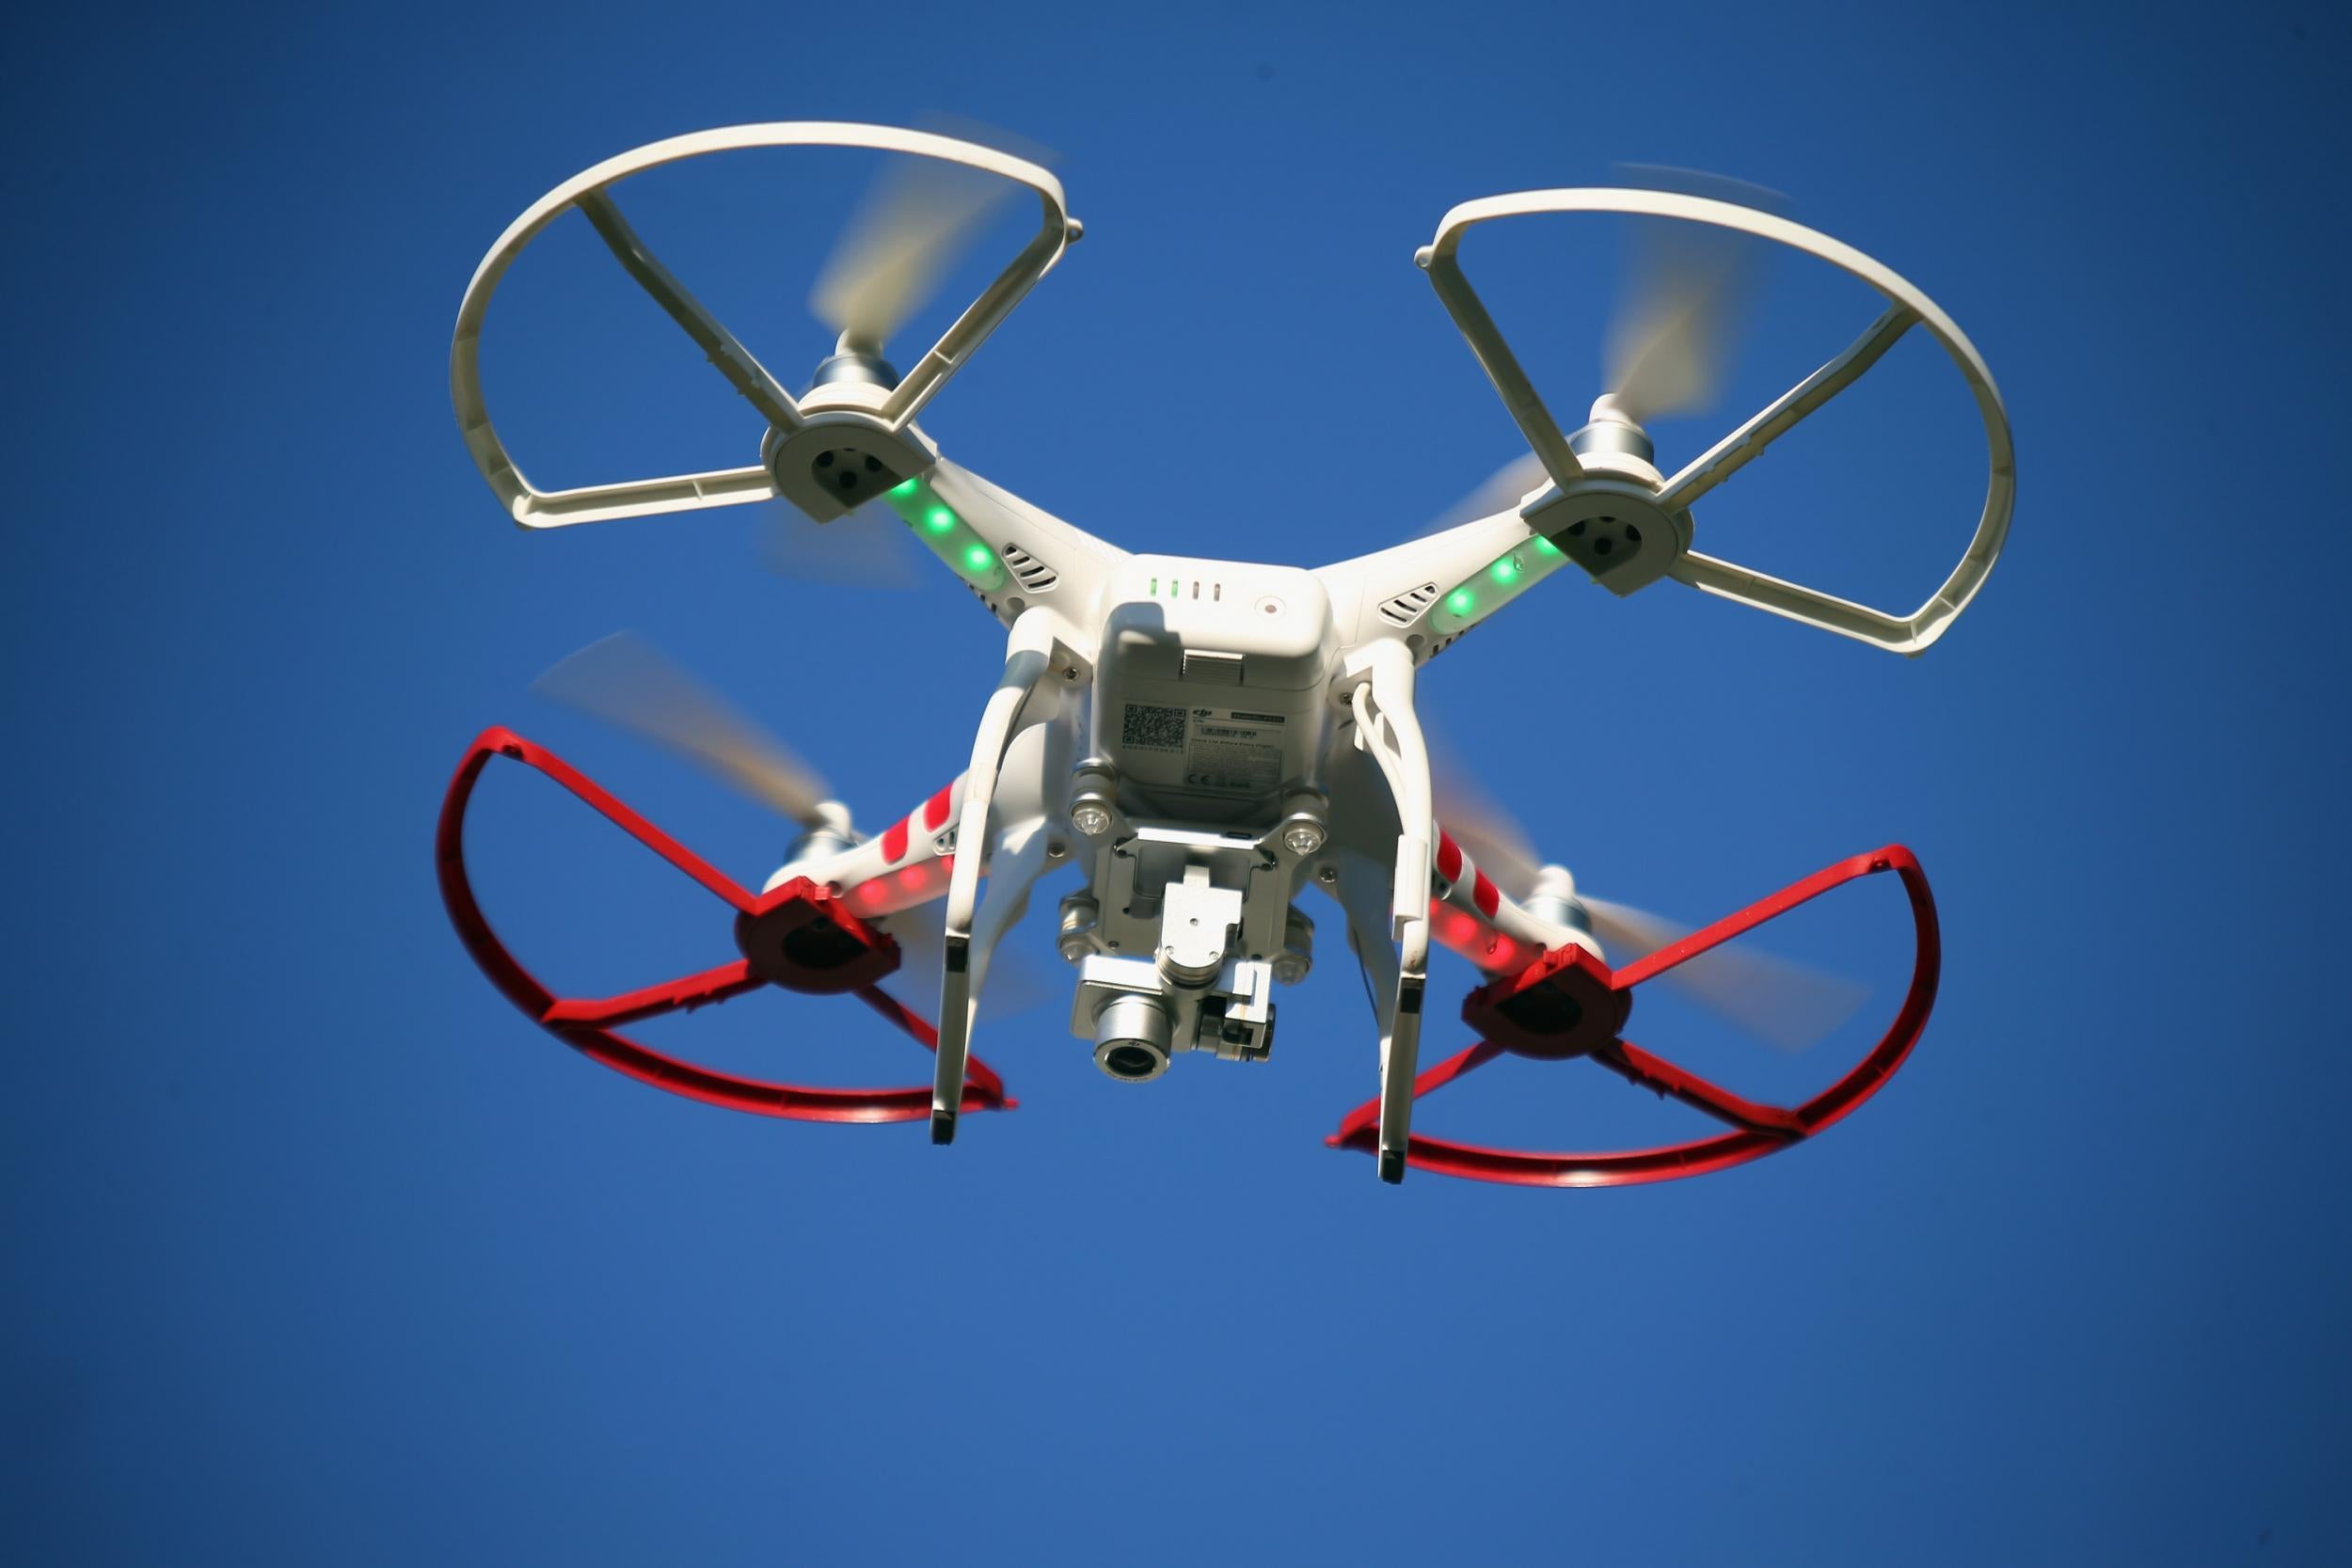 Drones are now better, cheaper, and more easily available than ever before